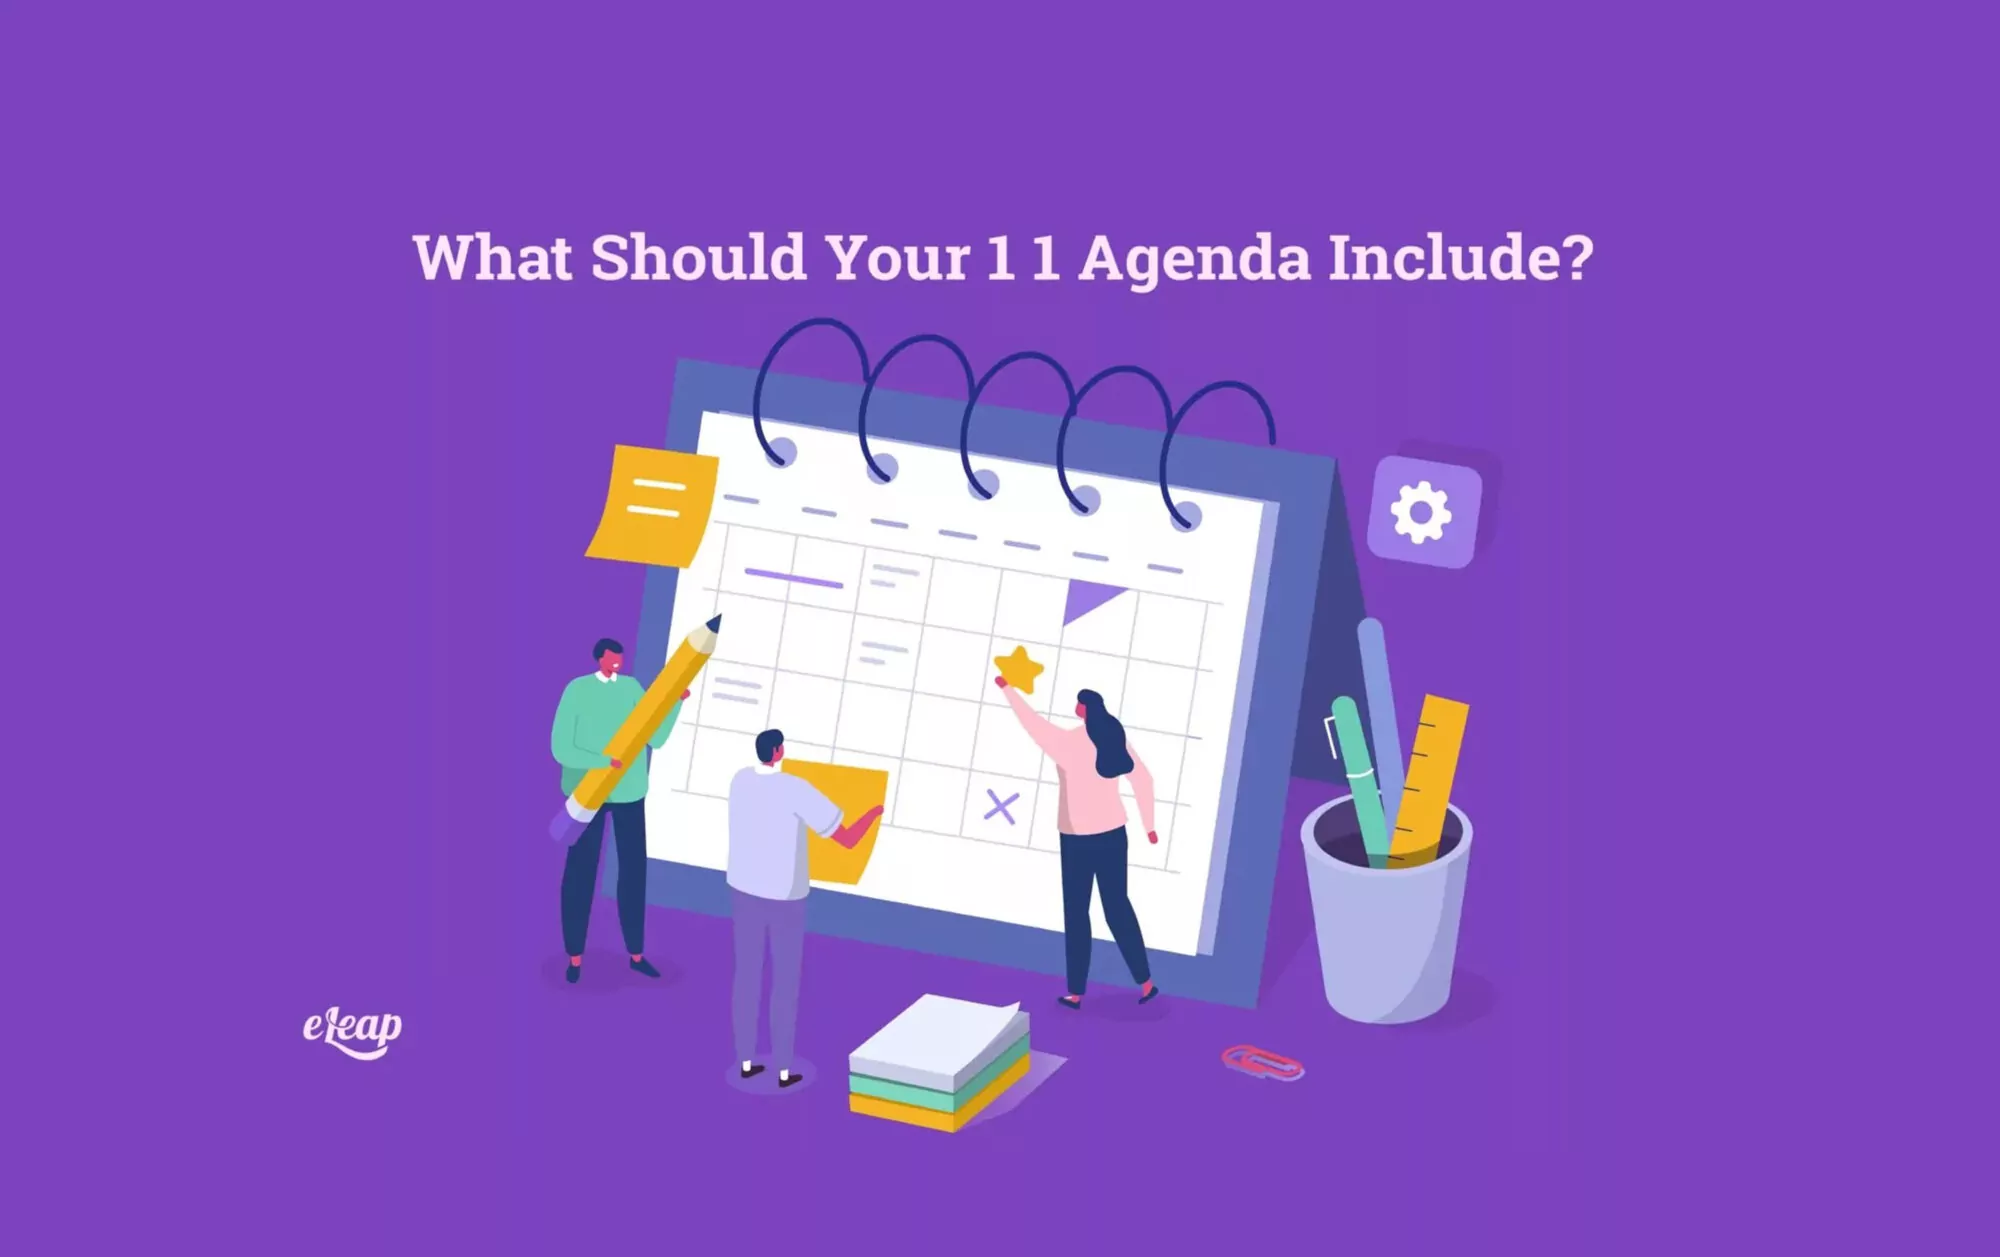 What Should Your 1 1 Agenda Include